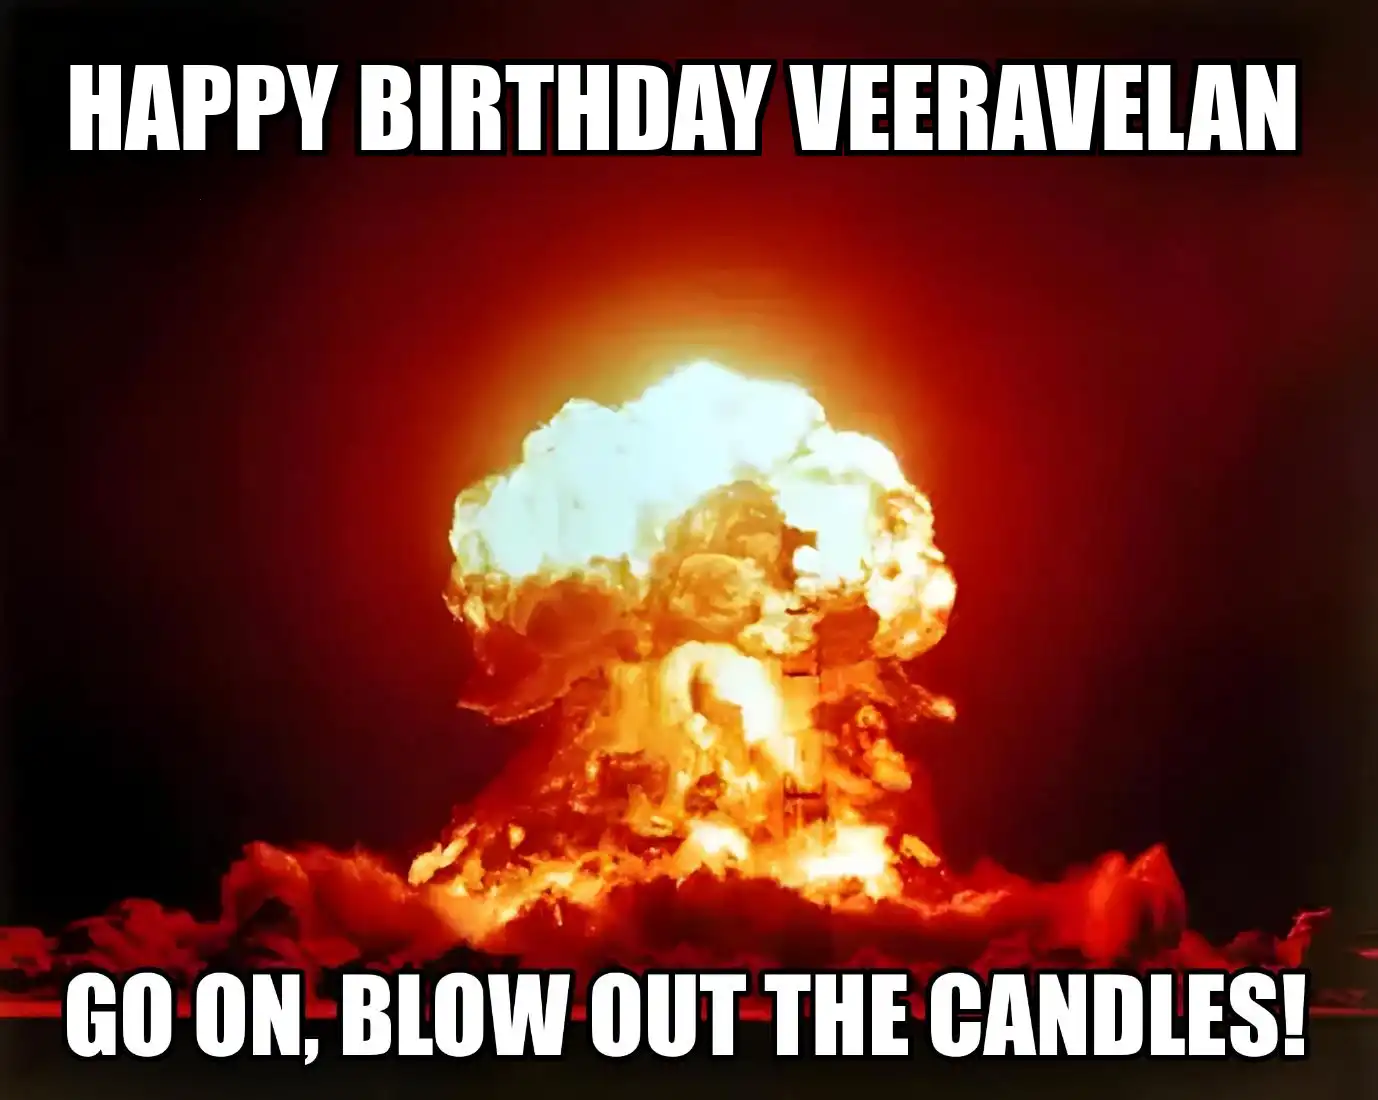 Happy Birthday Veeravelan Go On Blow Out The Candles Meme